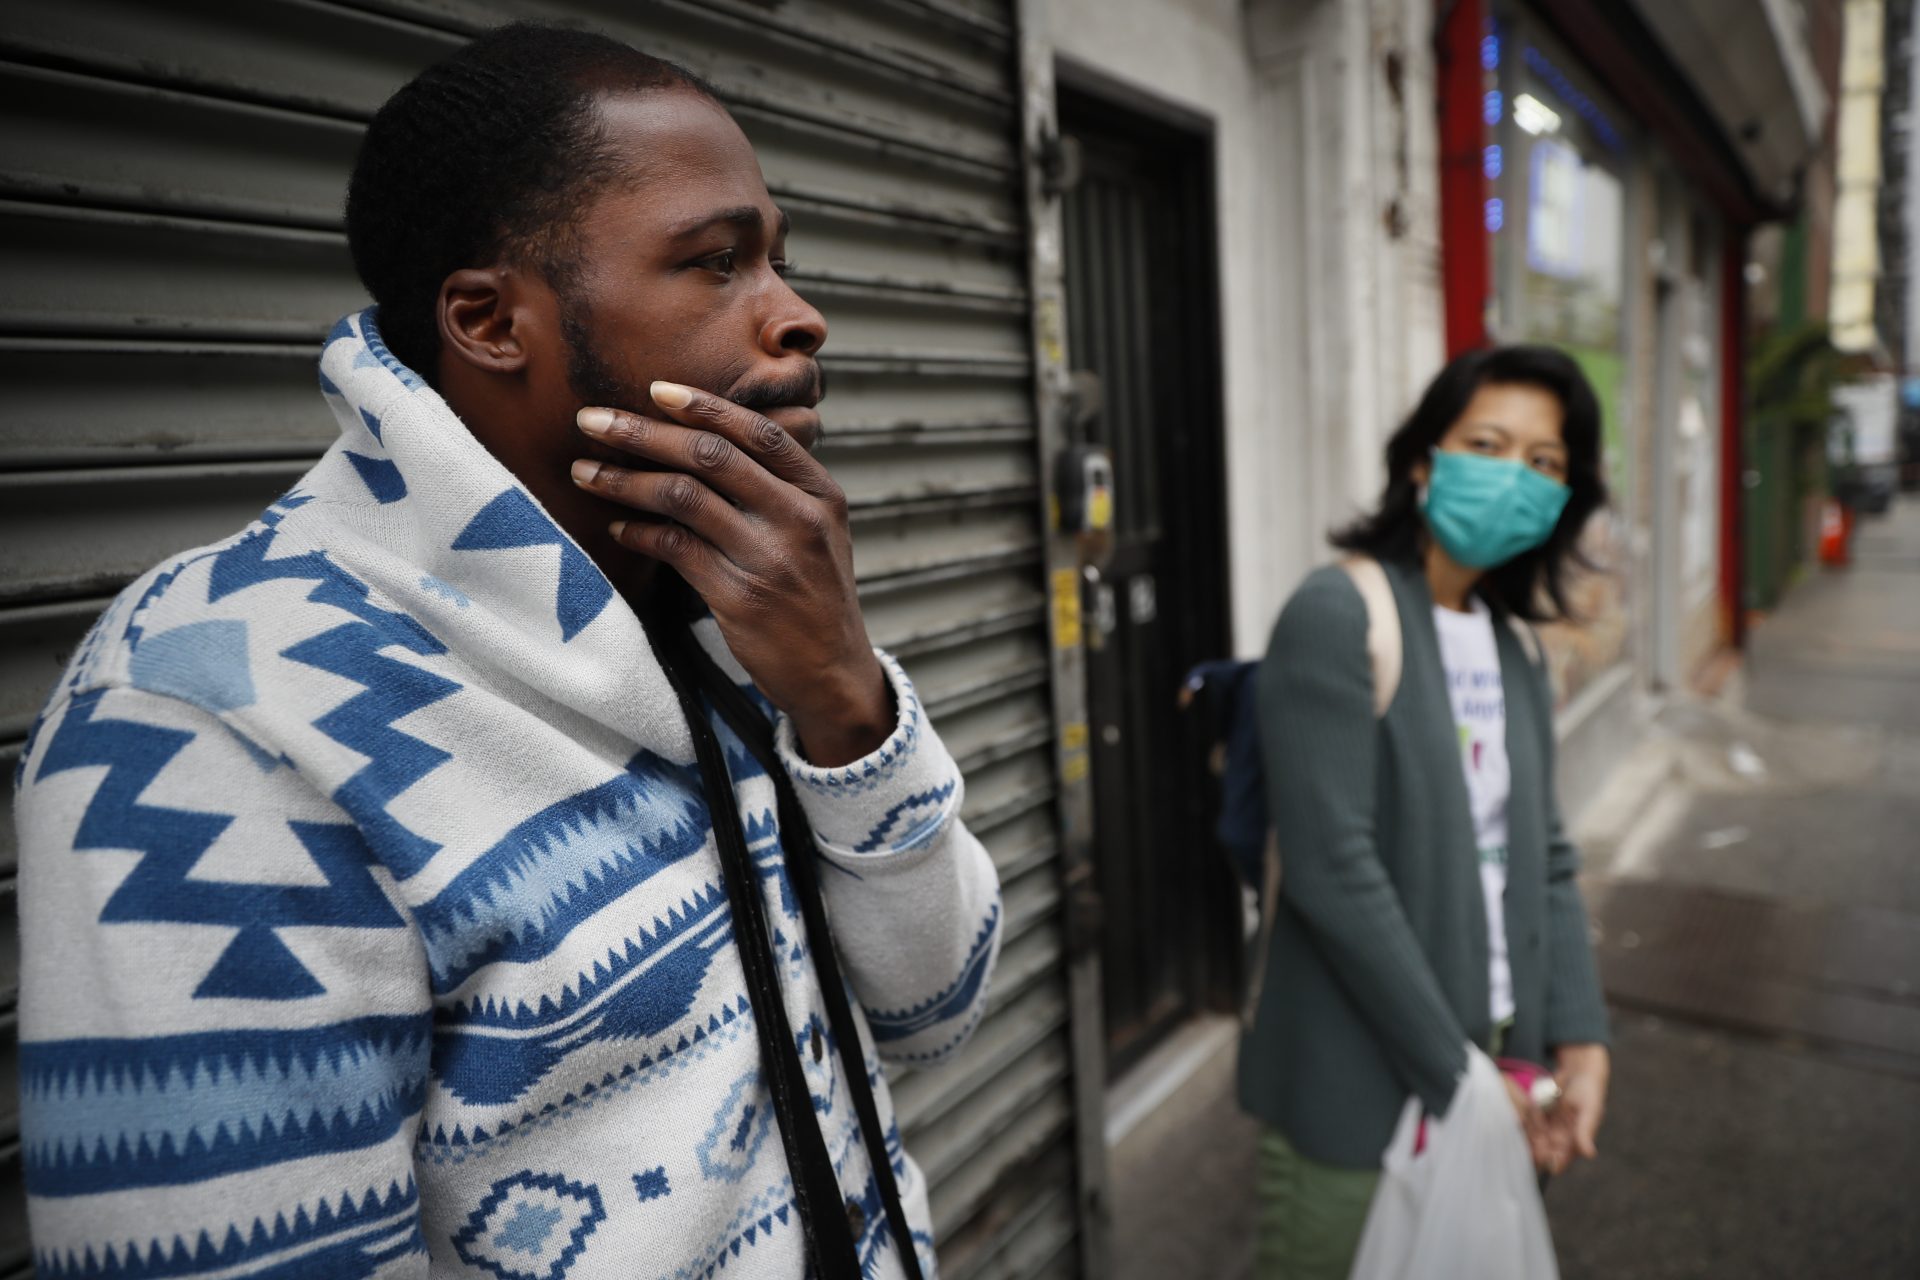 Brandon, 32, left, who lives with schizophrenia stands with Dr. Jeanie Tse, chief medical officer at the Institute for Community Living, right, as she makes her rounds treating patients, Wednesday, May 6, 2020, in the Brooklyn borough of New York.